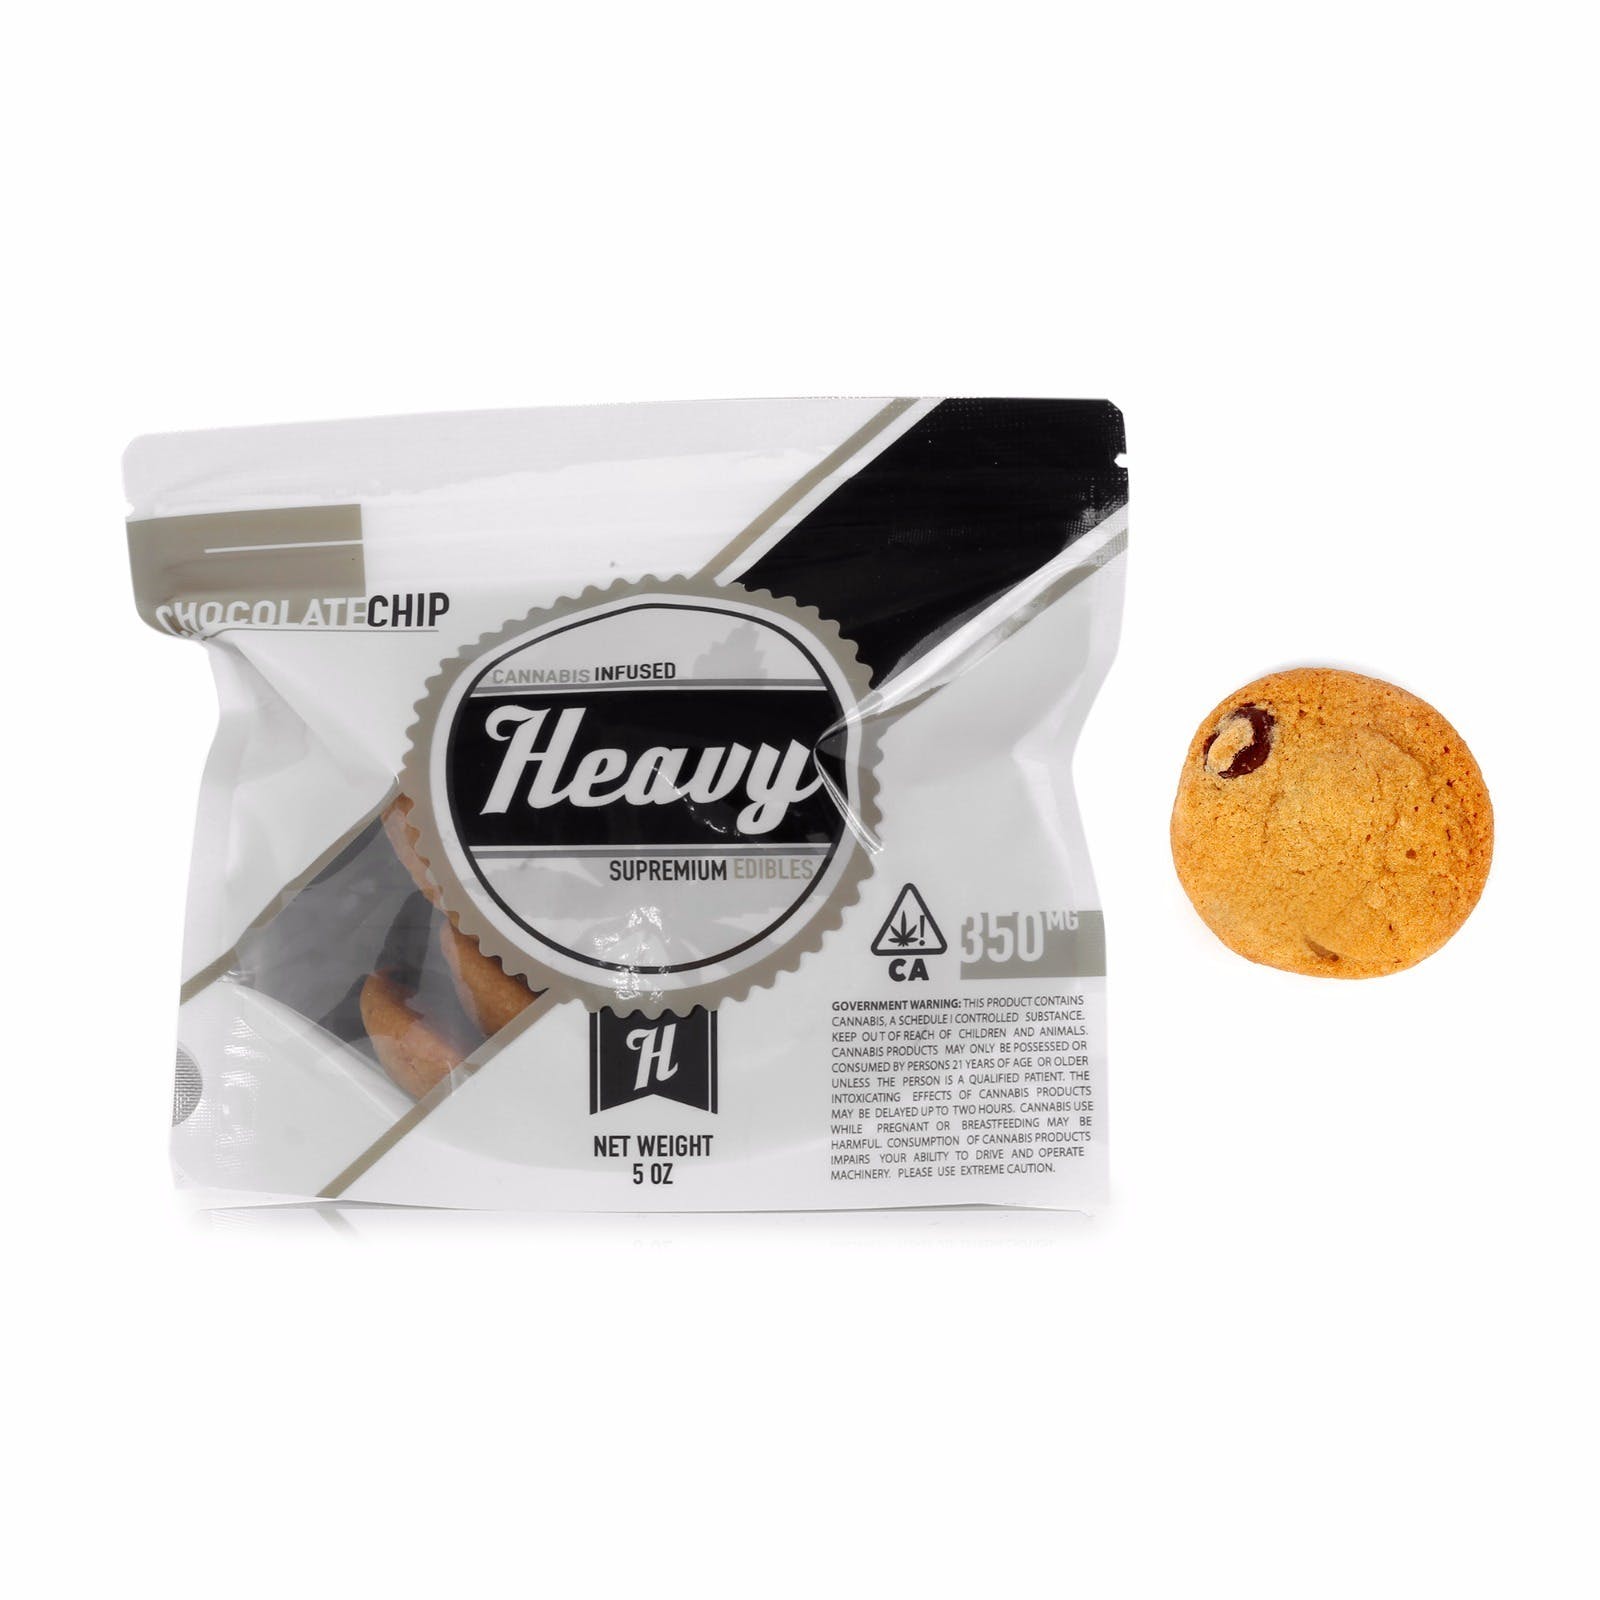 marijuana-dispensaries-manchester-remedy-in-los-angeles-chocolate-chip-cookies-350mg